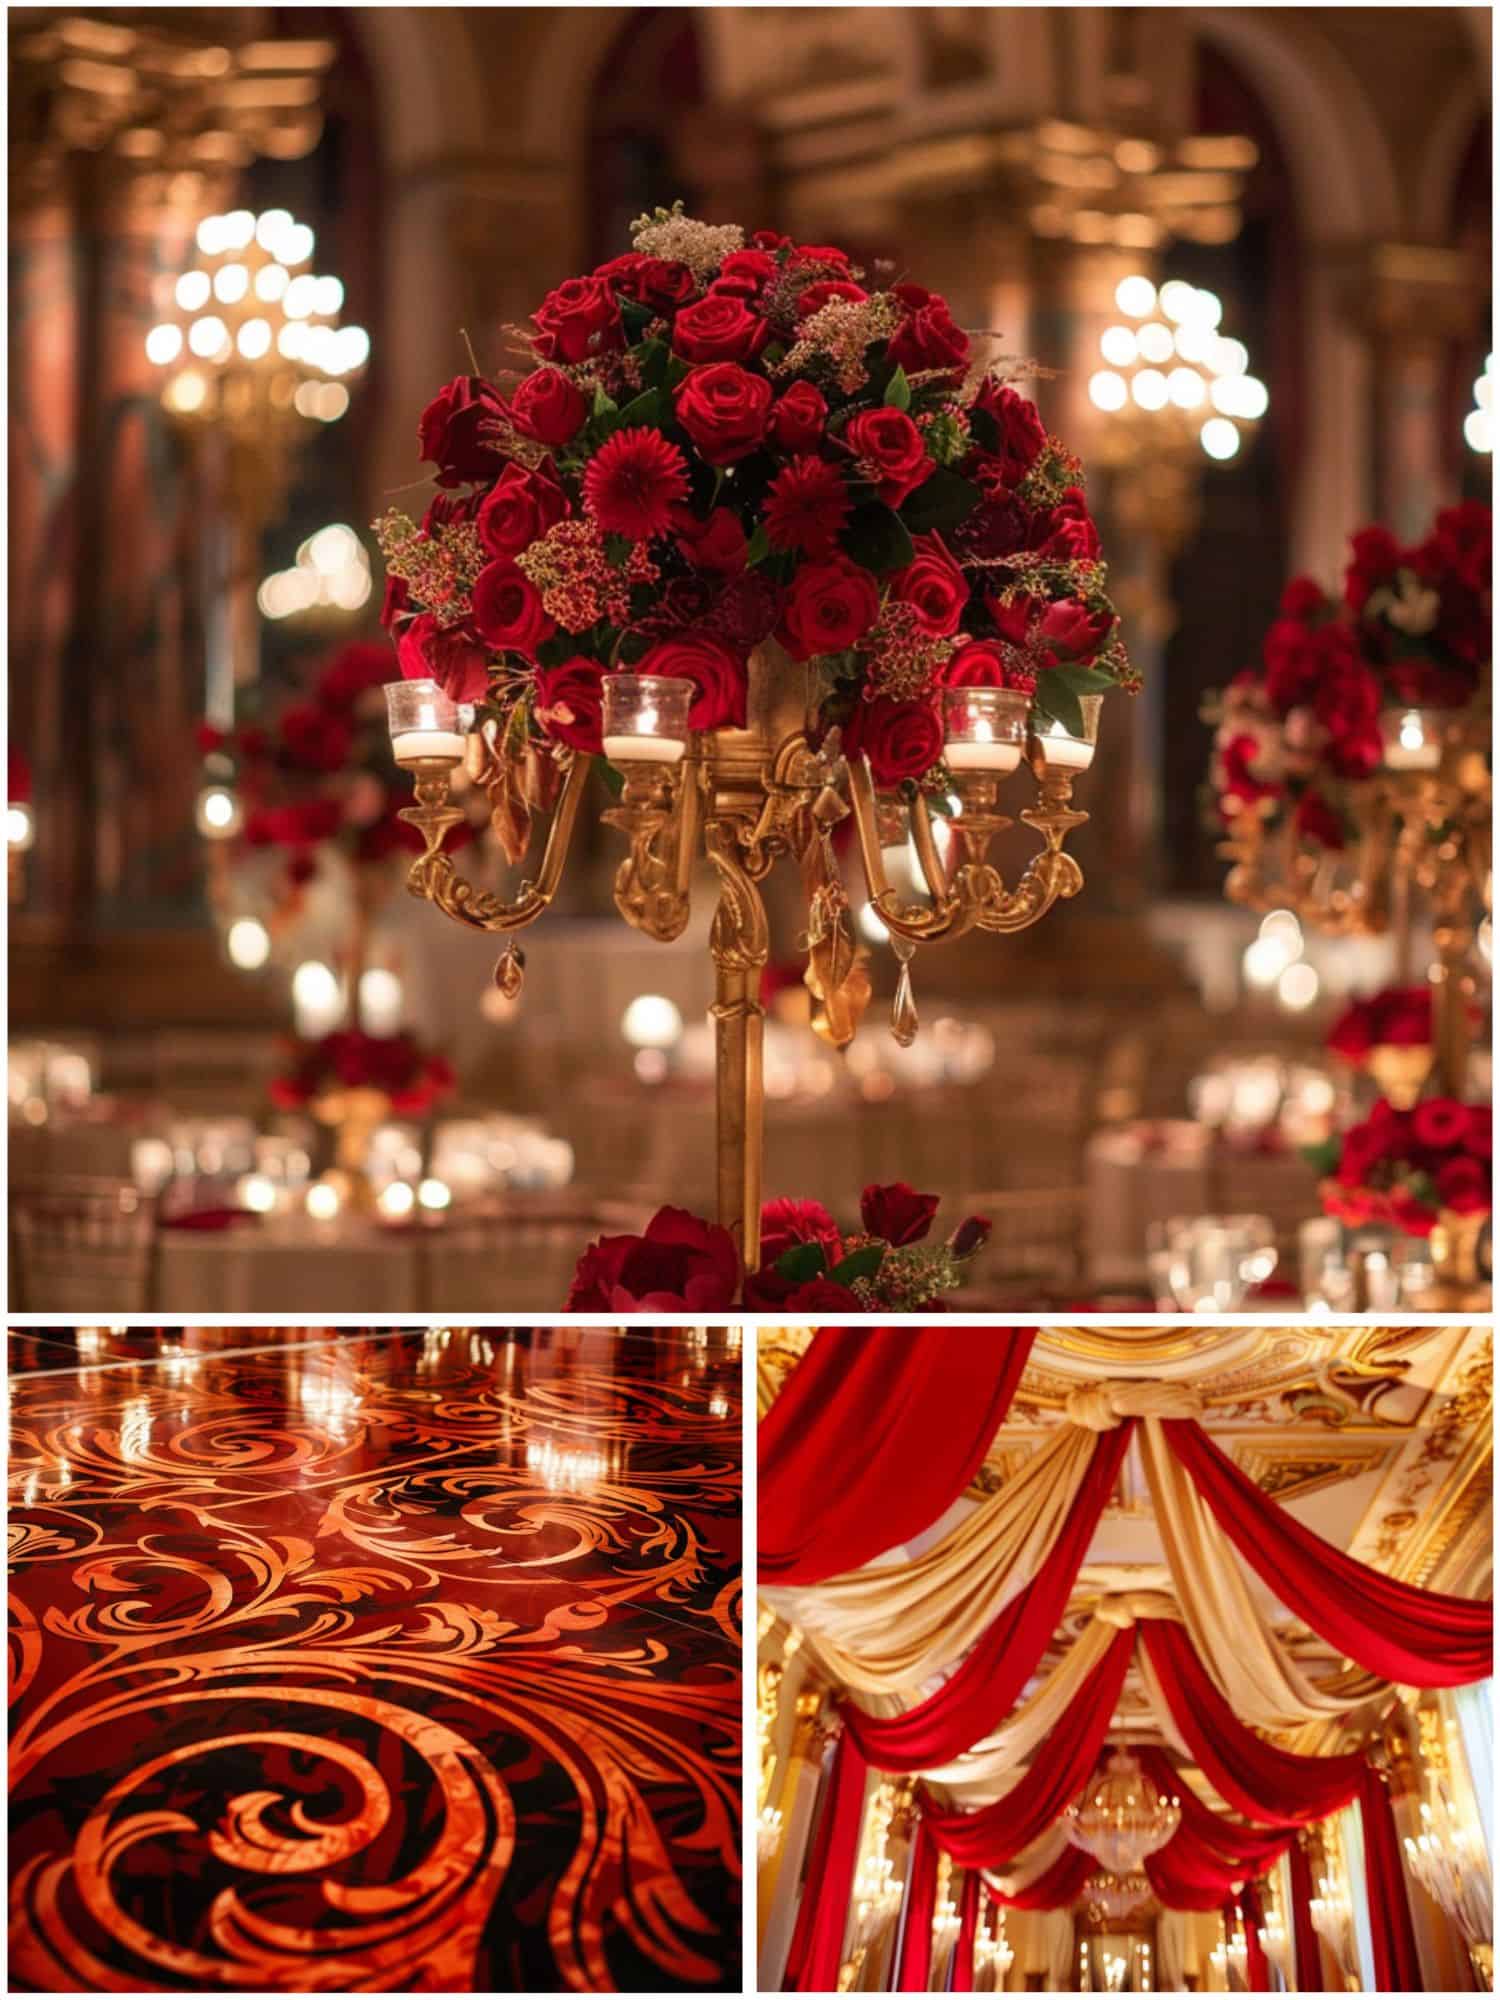 grand ballroom wedding in red and gold